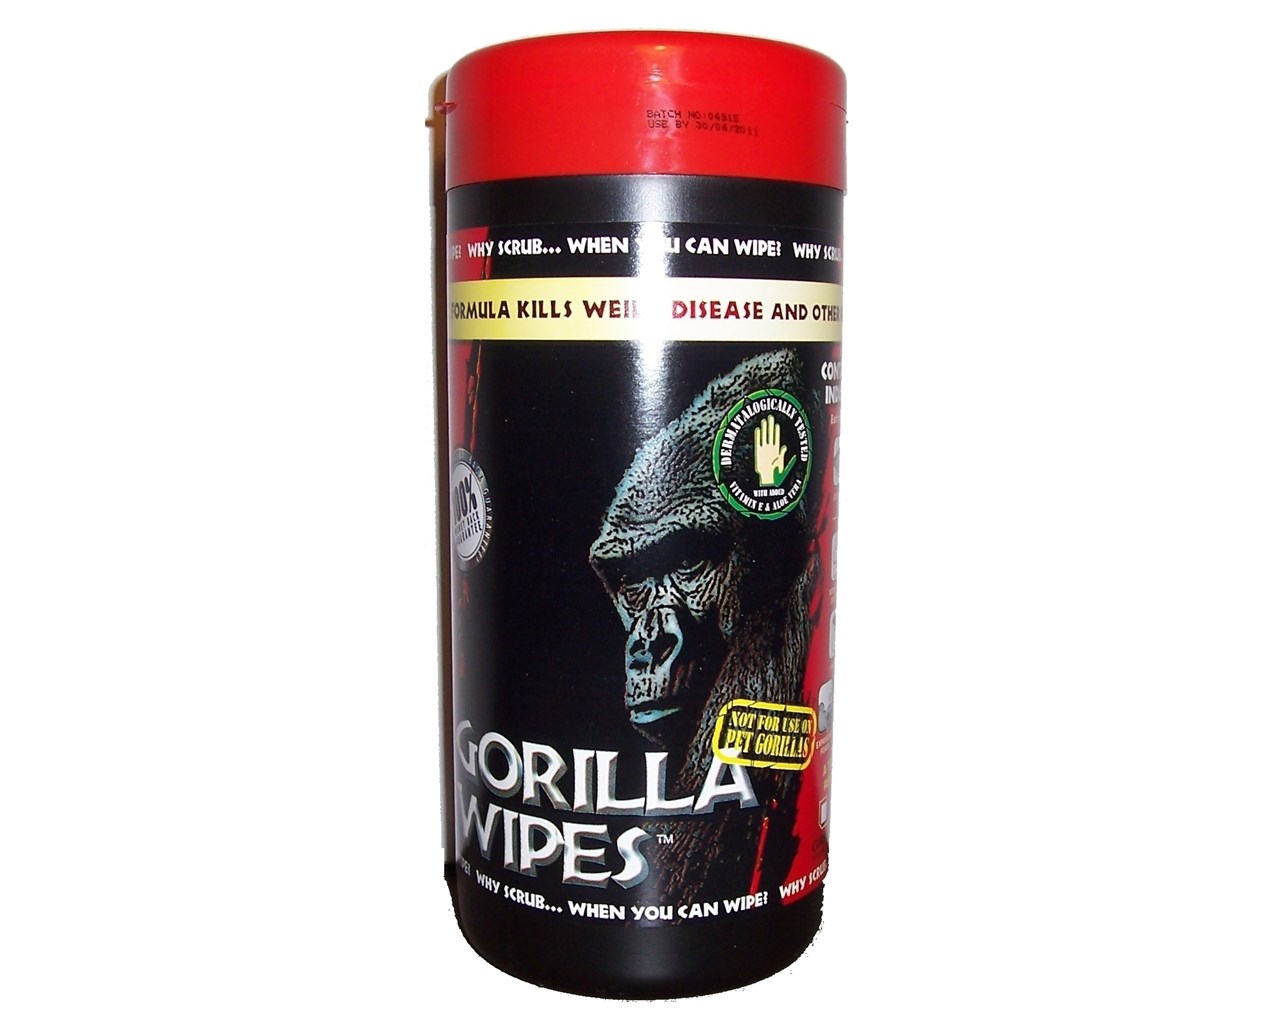 Gorilla Wipes - Official